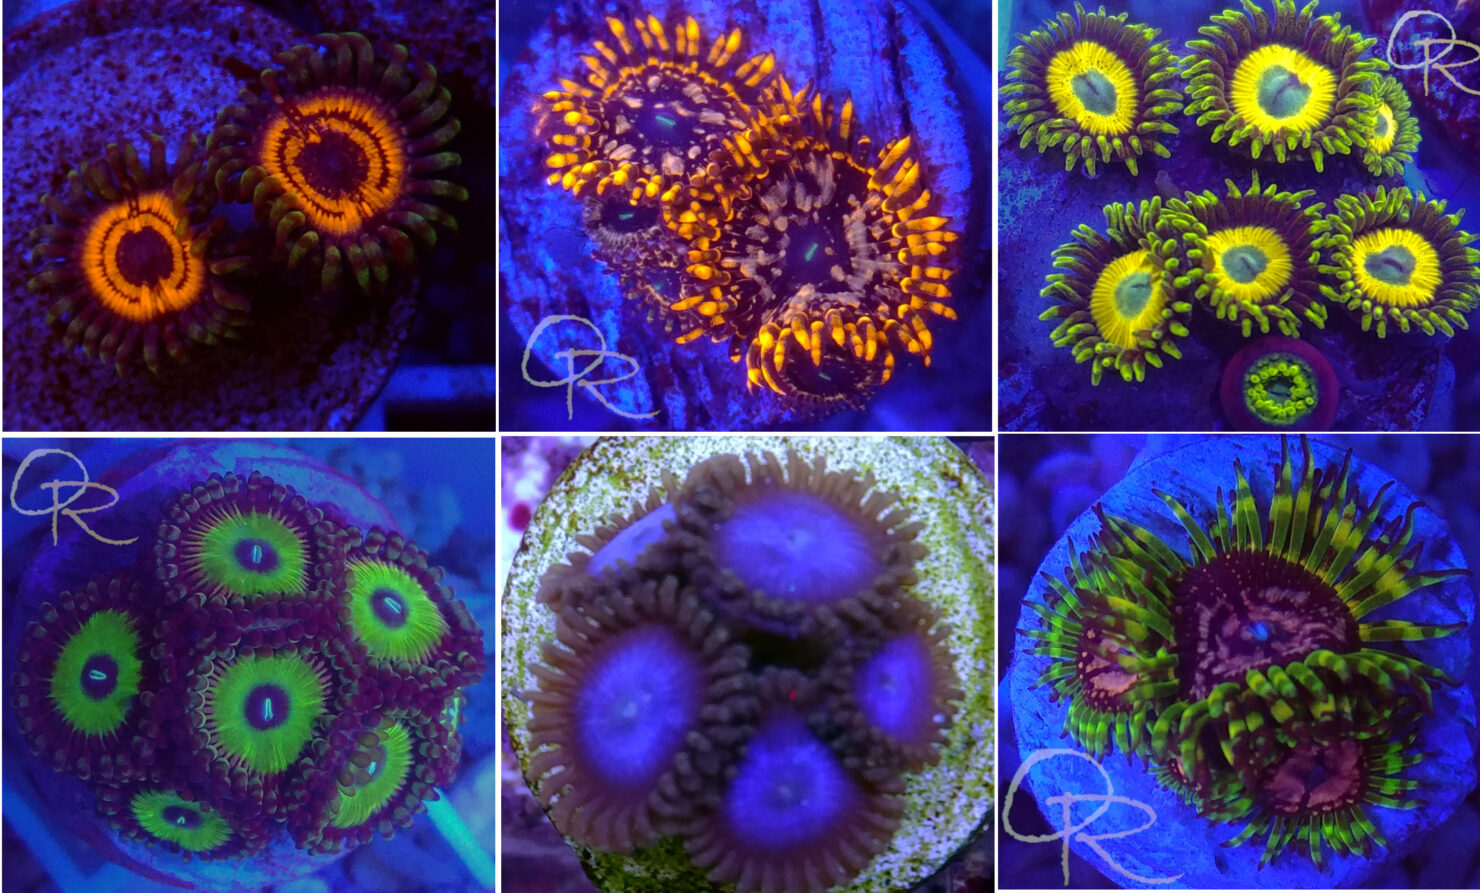 The Full Rainbow Zoanthids Six-Pack